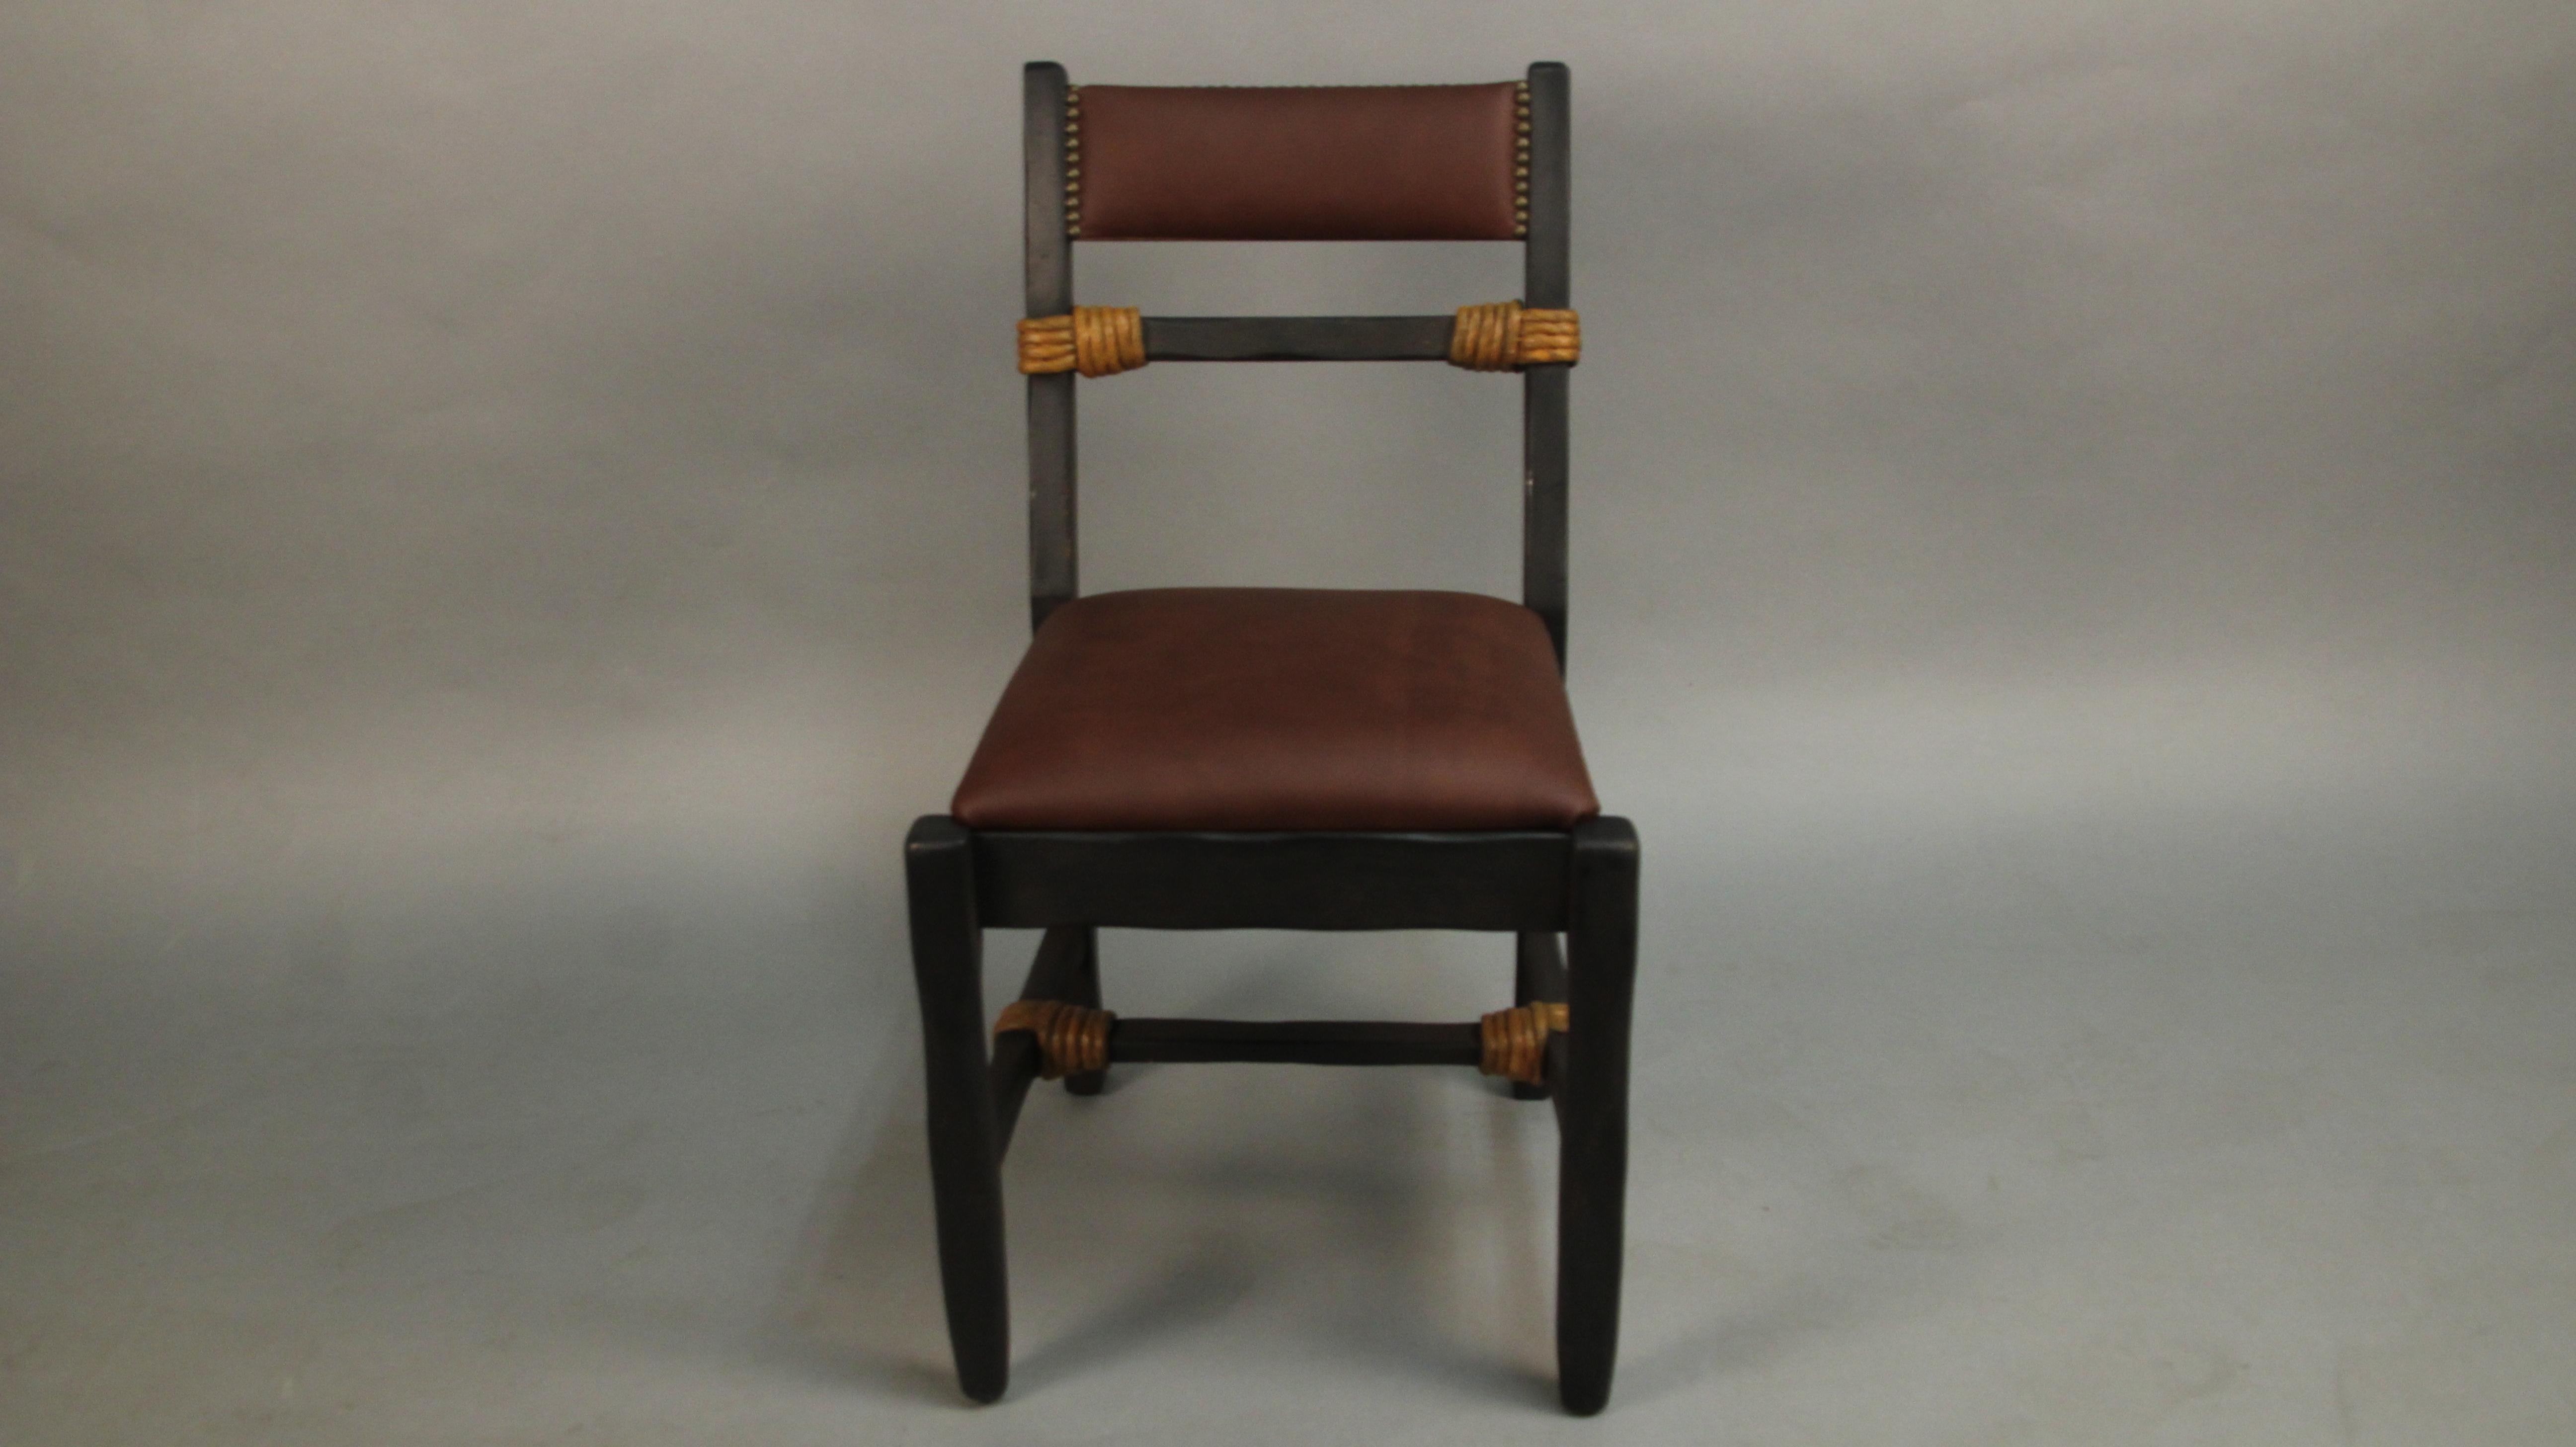 Handsome set of 6 armchairs made by Coronado, circa 1930s. Restored finish and new leather upholstery.